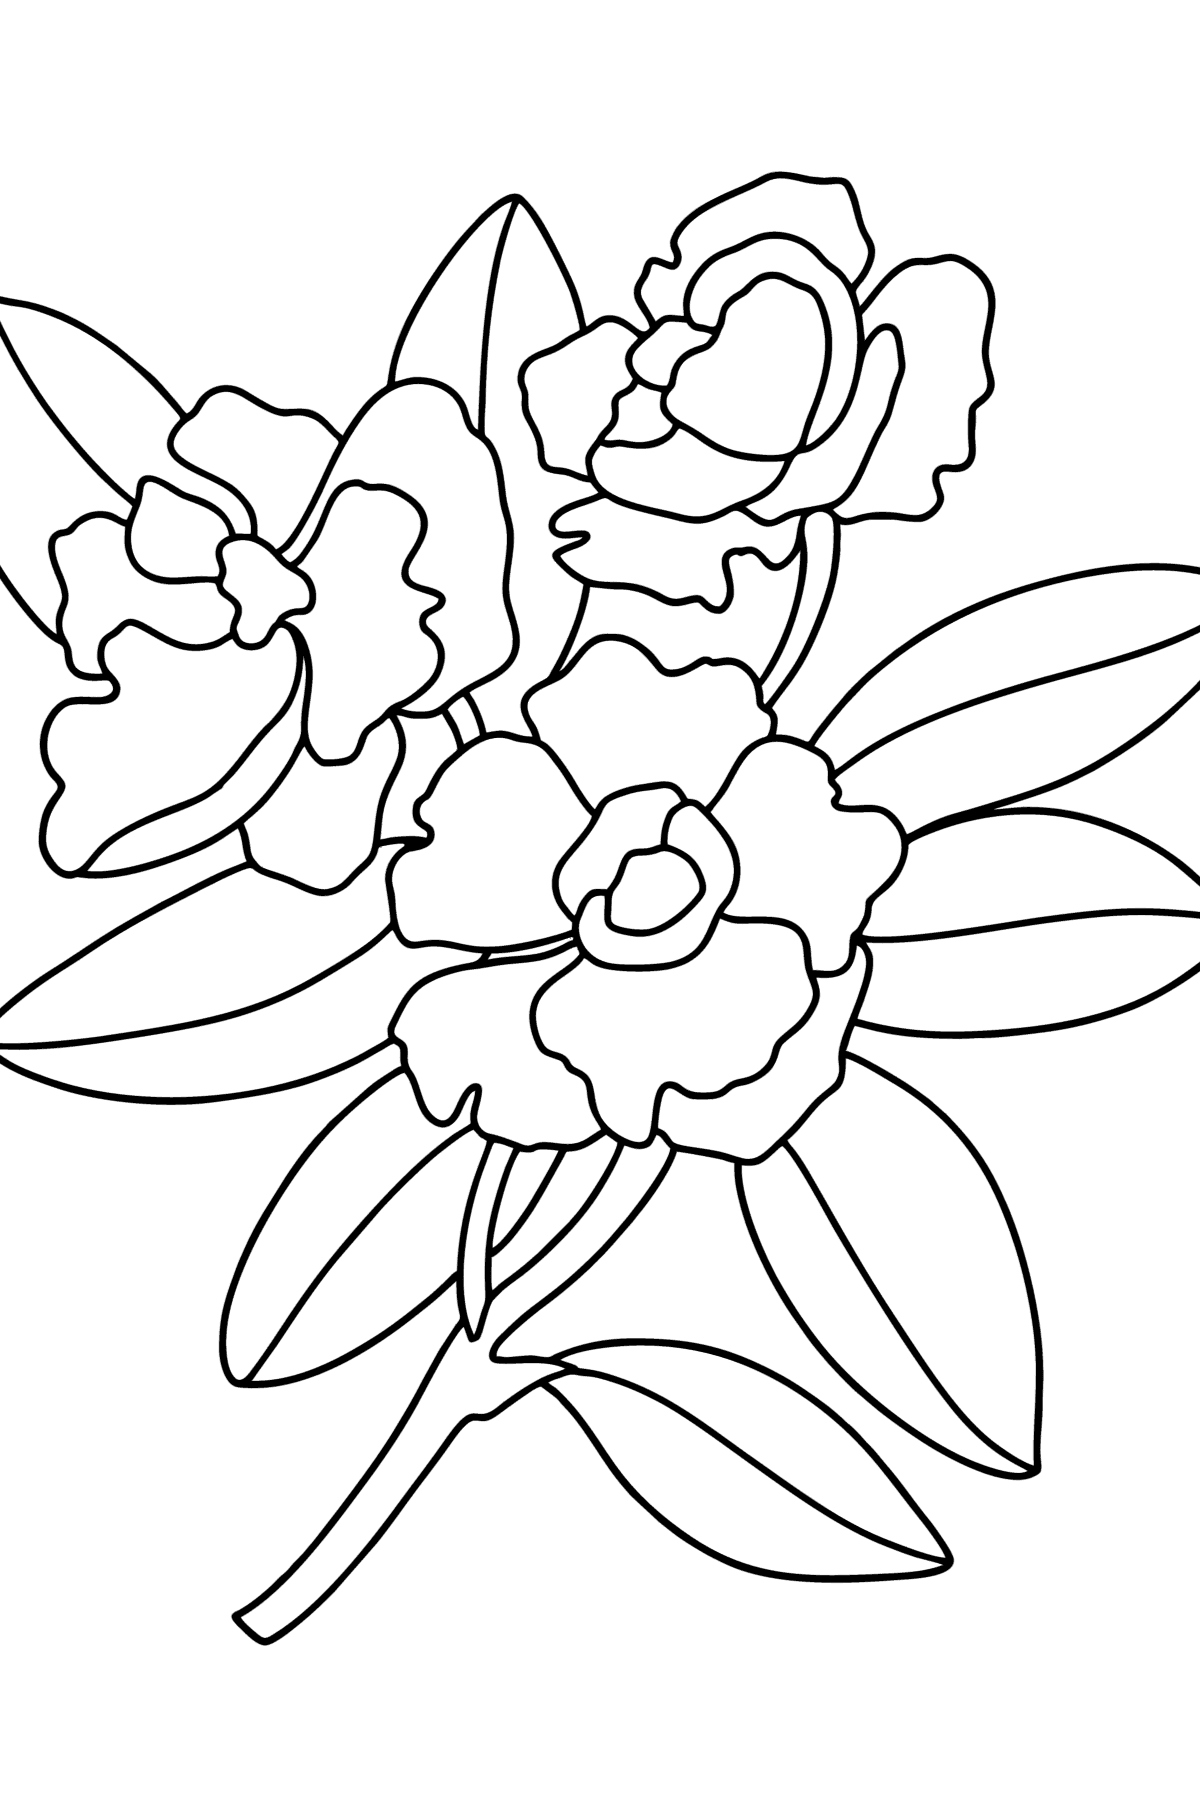 Gardenia coloring page - Coloring Pages for Kids